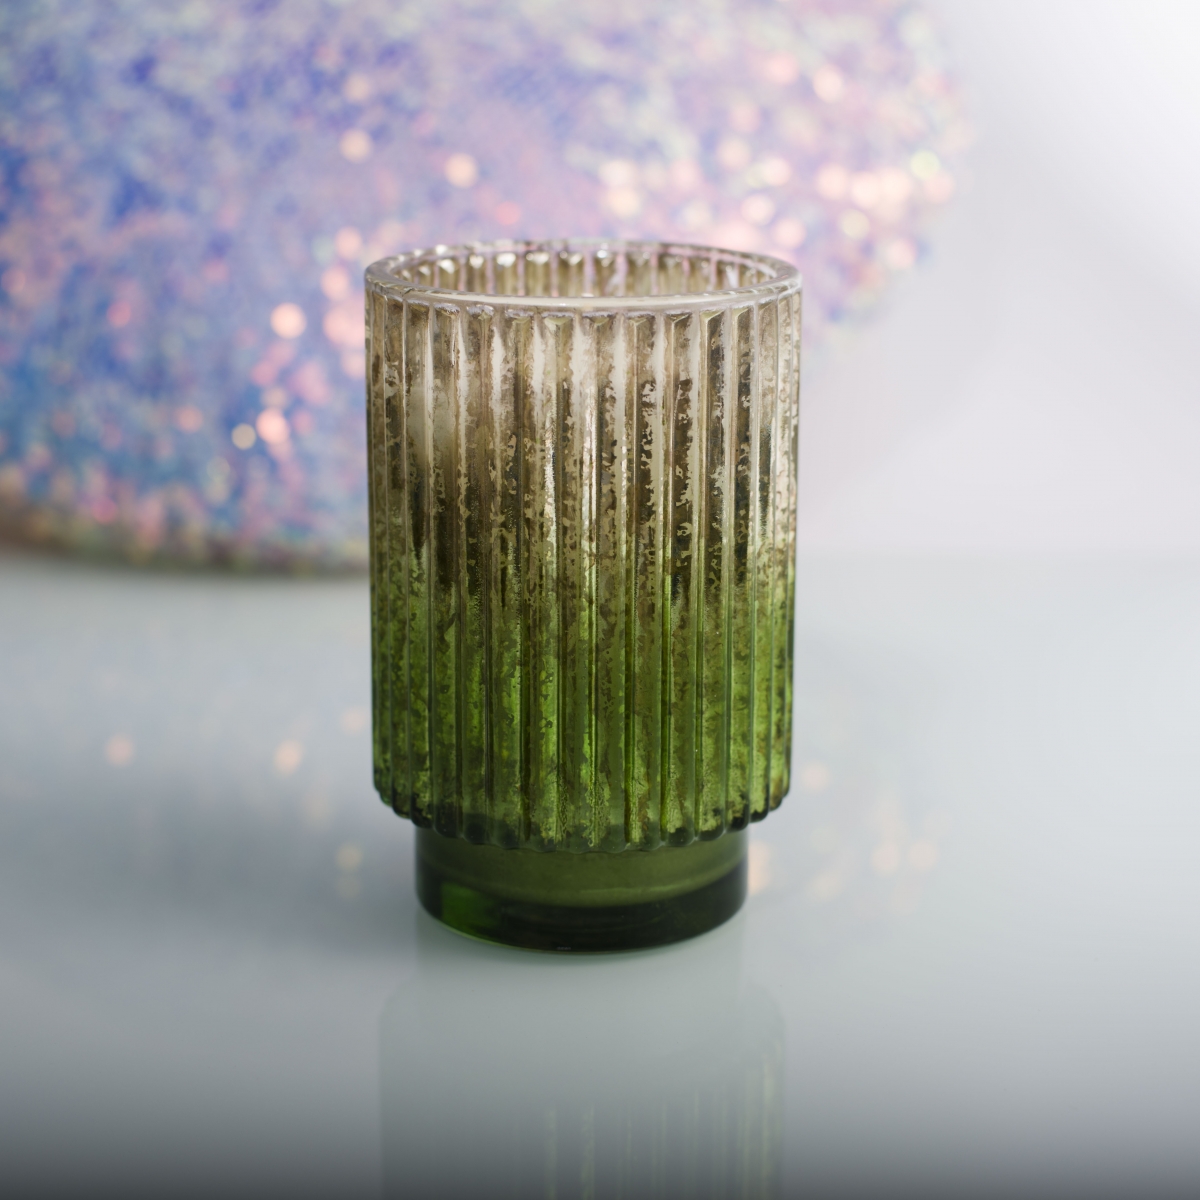 Christmas Candle Gift Sets : Stripe Embossed Glass Jar ,Retro Green ,China Factory ,Wholesale Price-HOWCANDLE-Candles,Scented Candles,Aromatherapy Candles,Soy Candles,Vegan Candles,Jar Candles,Pillar Candles,Candle Gift Sets,Essential Oils,Reed Diffuser,Candle Holder,